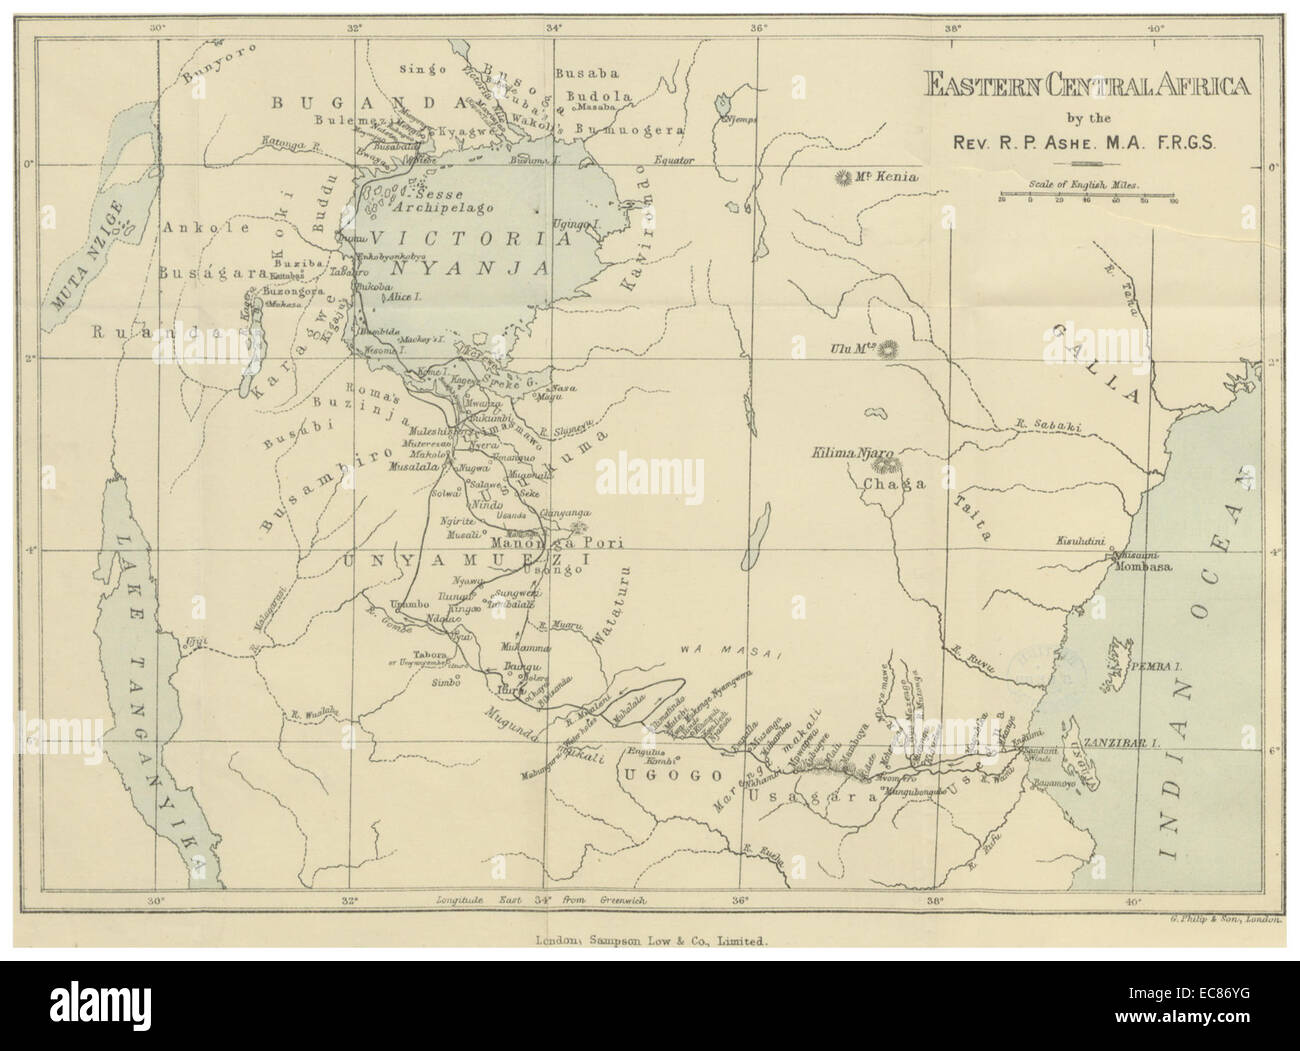 ASHE(1889) MAP OF EASTERN CENTRAL AFRICA Stock Photo